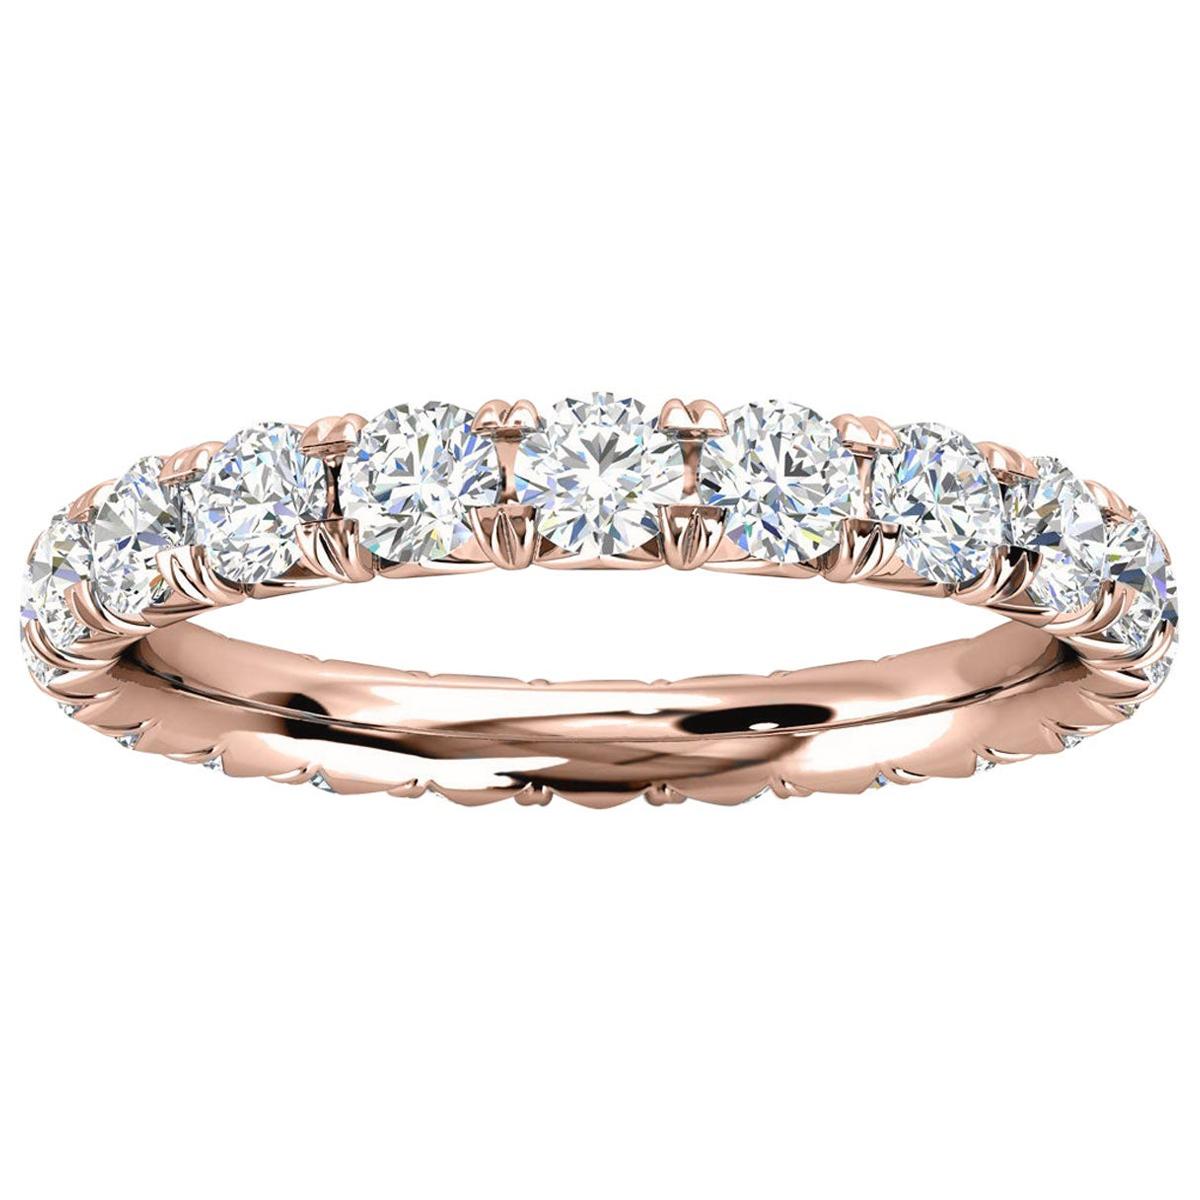 For Sale:  18k Rose Gold Mia French Pave Diamond Eternity Ring '1 1/2 Ct. tw'